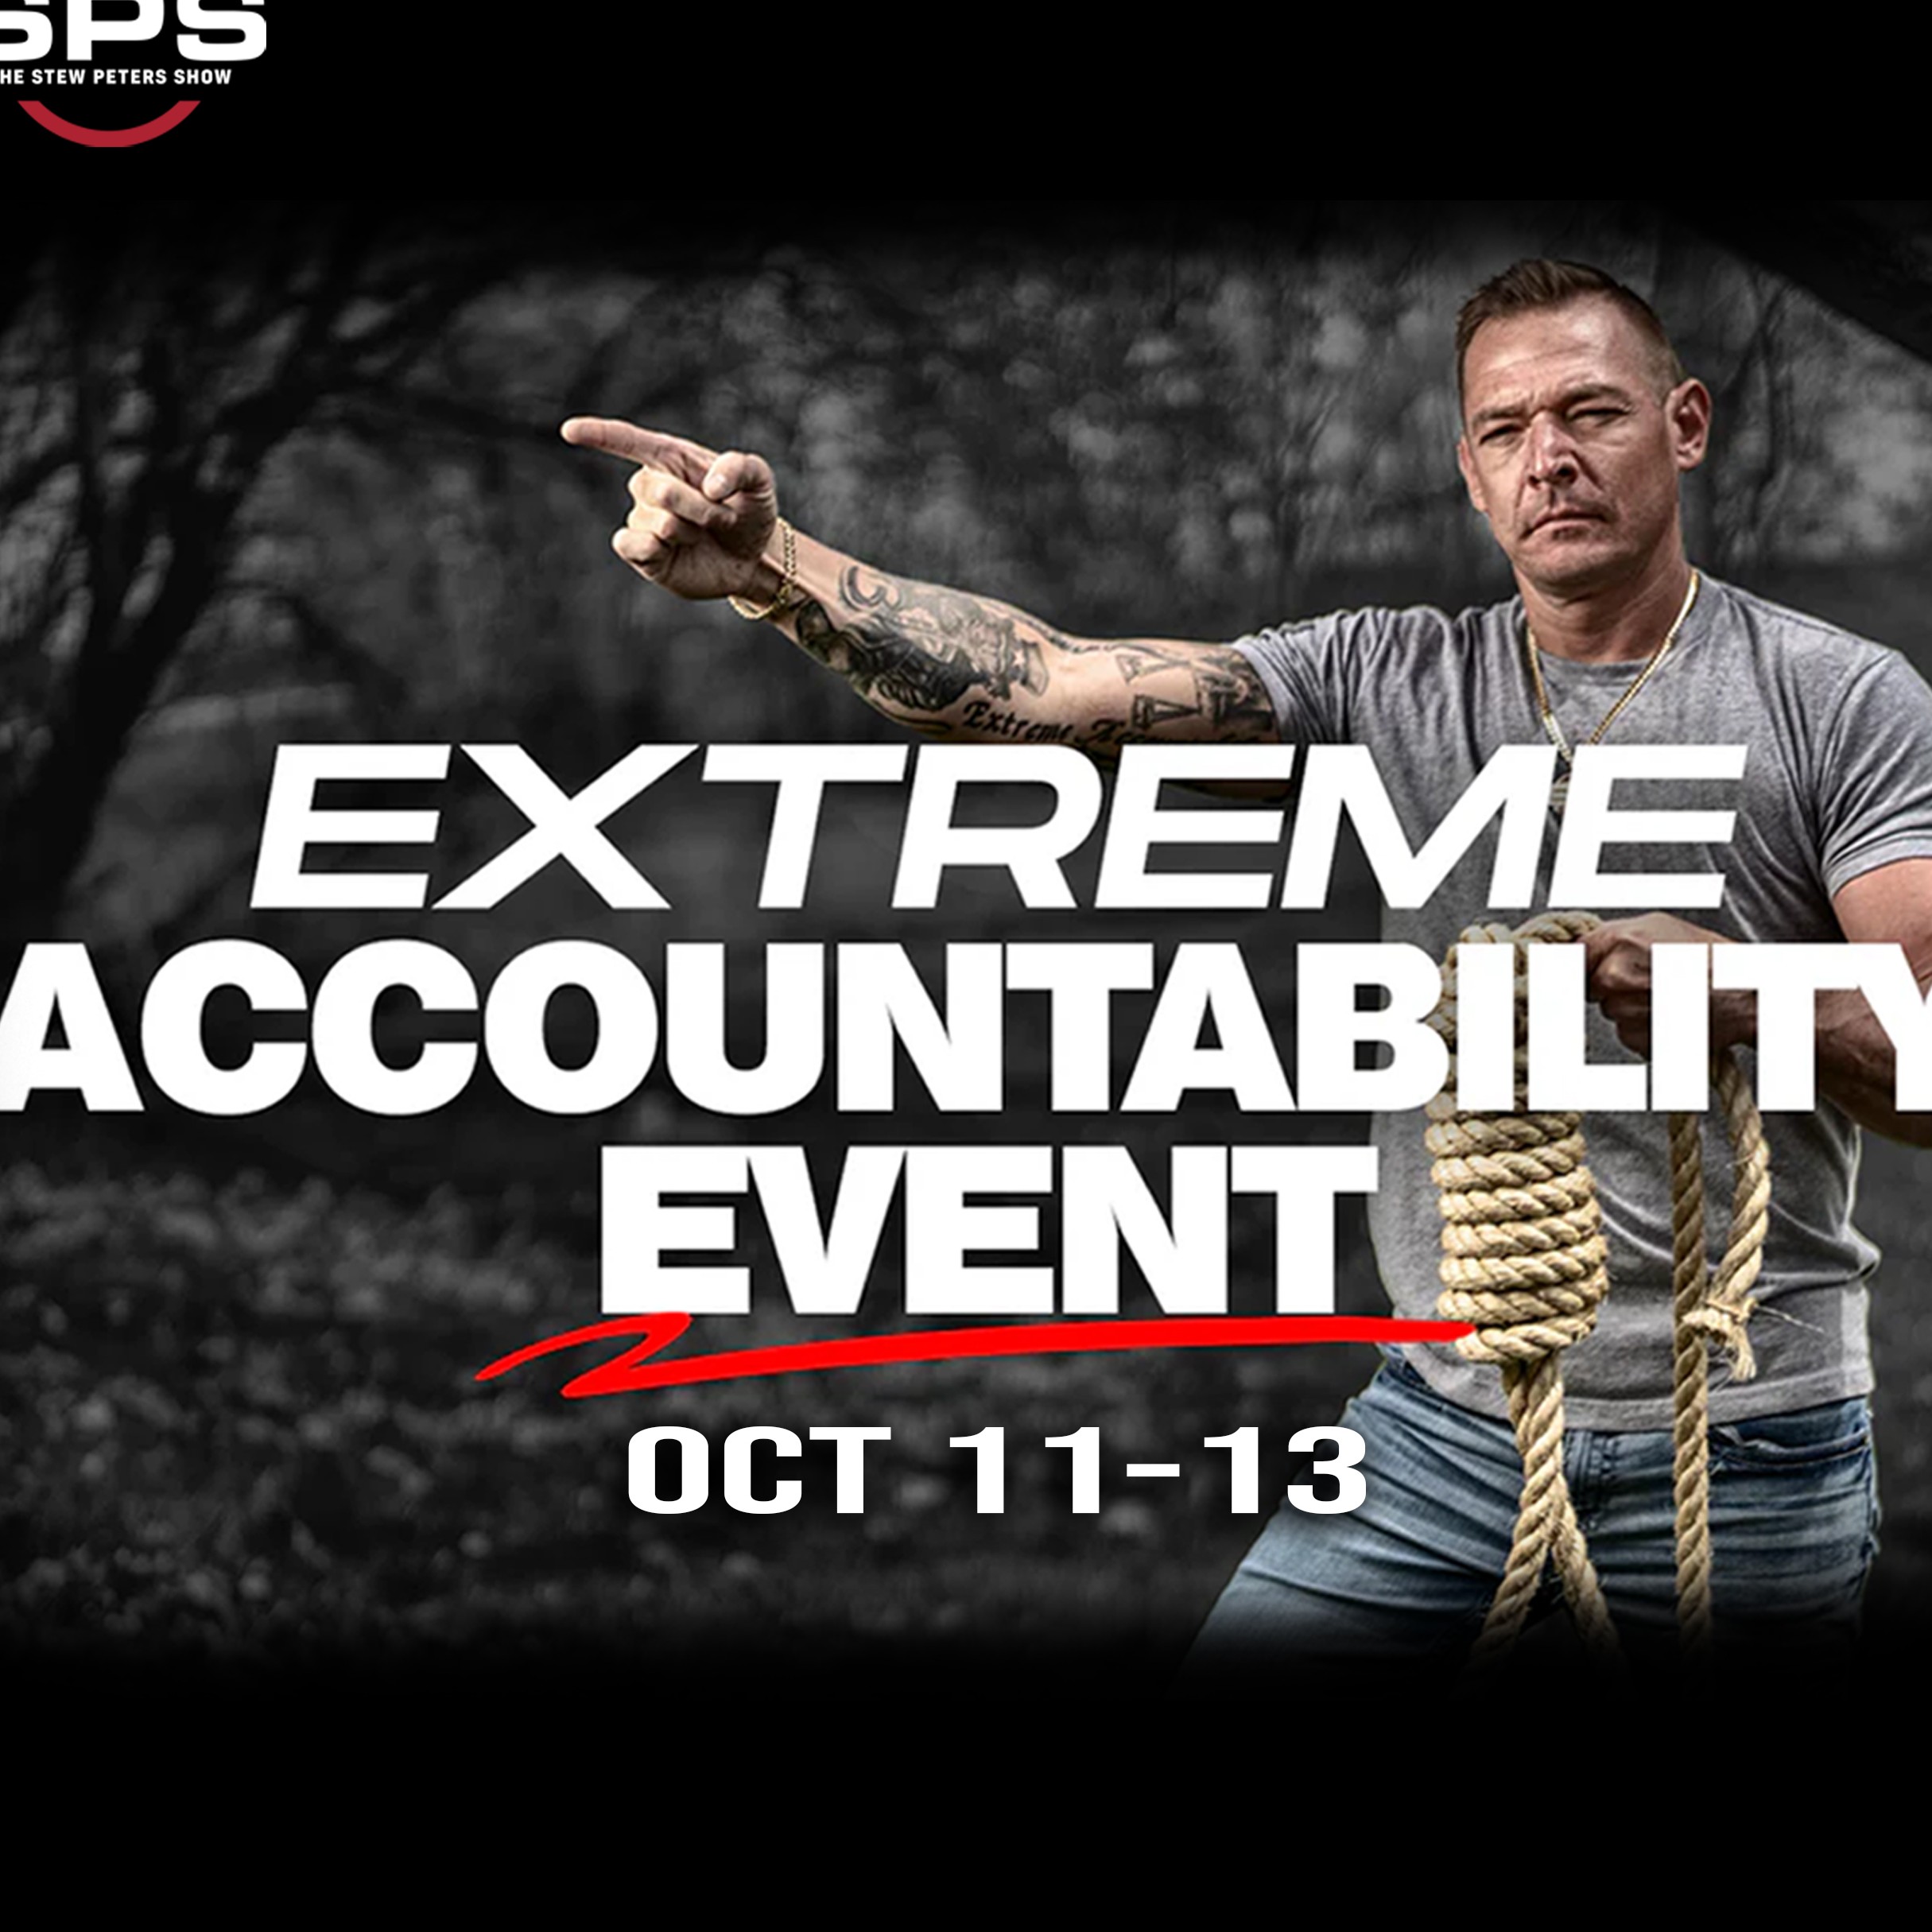 HUGE ANNOUNCEMENT: Road to EXTREME Accountability Begins NOW!